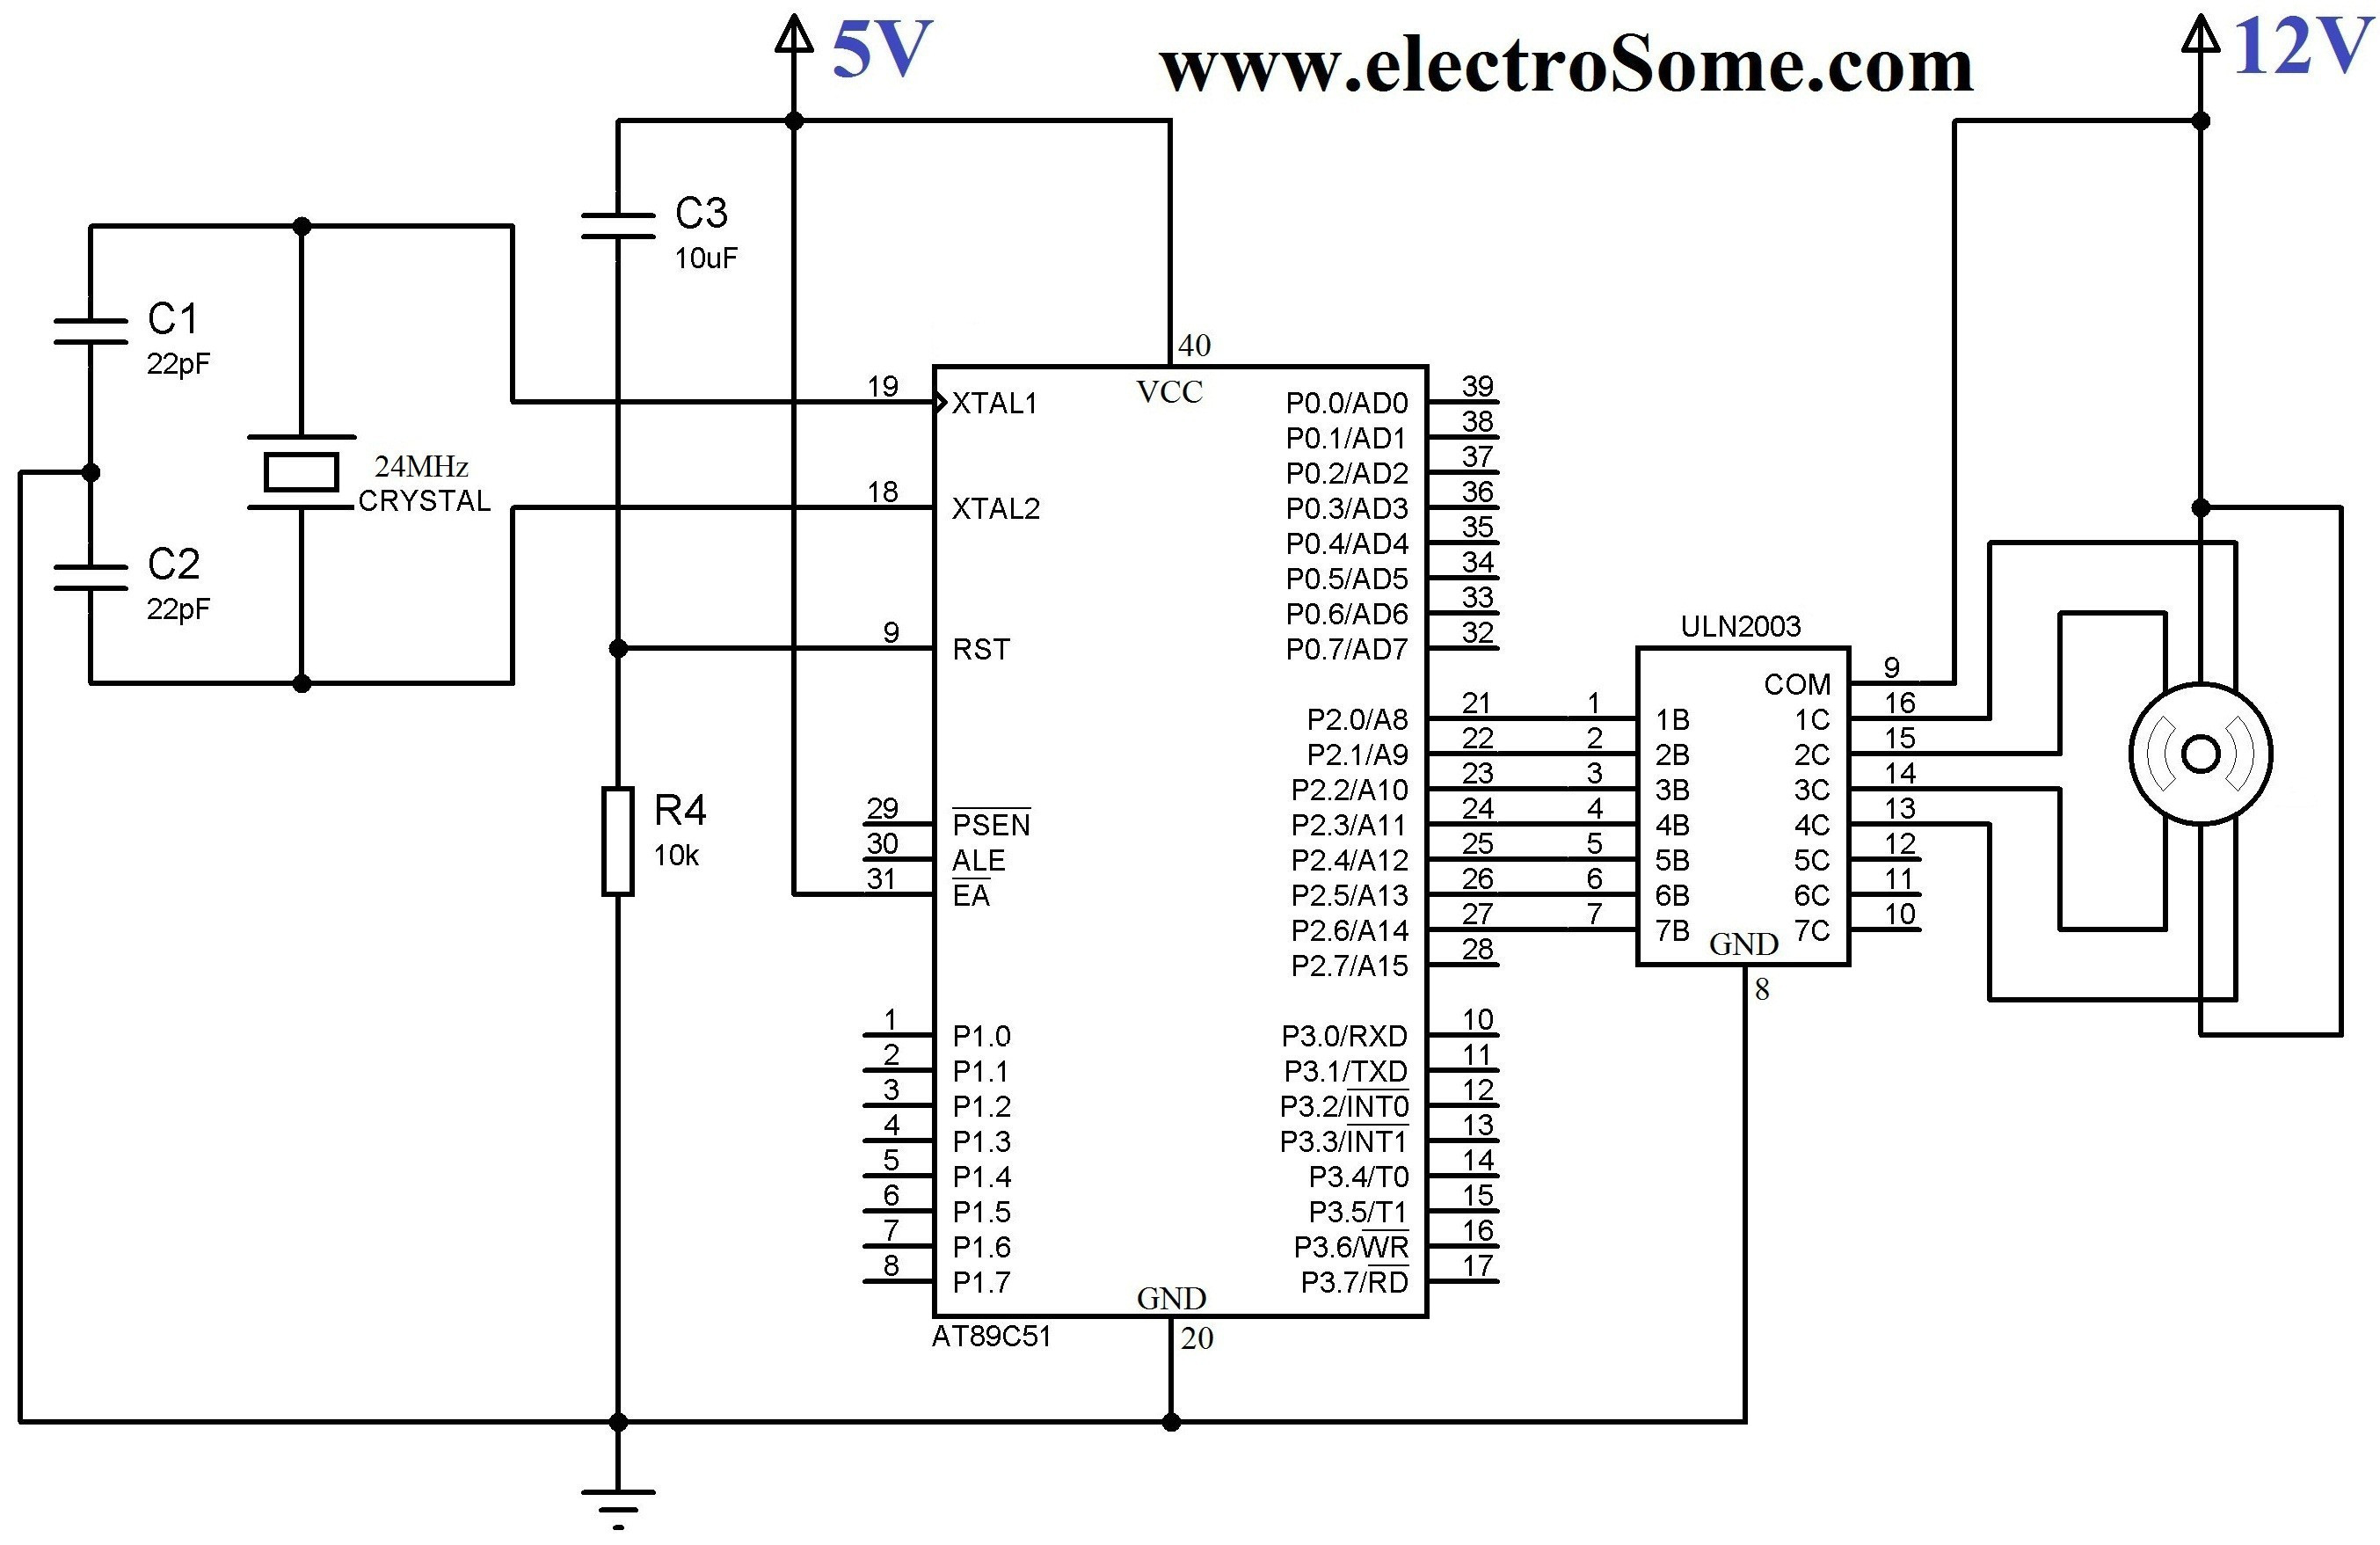 24 Volt Contactor Wiring Diagram Rate Wiring Diagram Kontaktor - 24 Volt Wiring Diagram